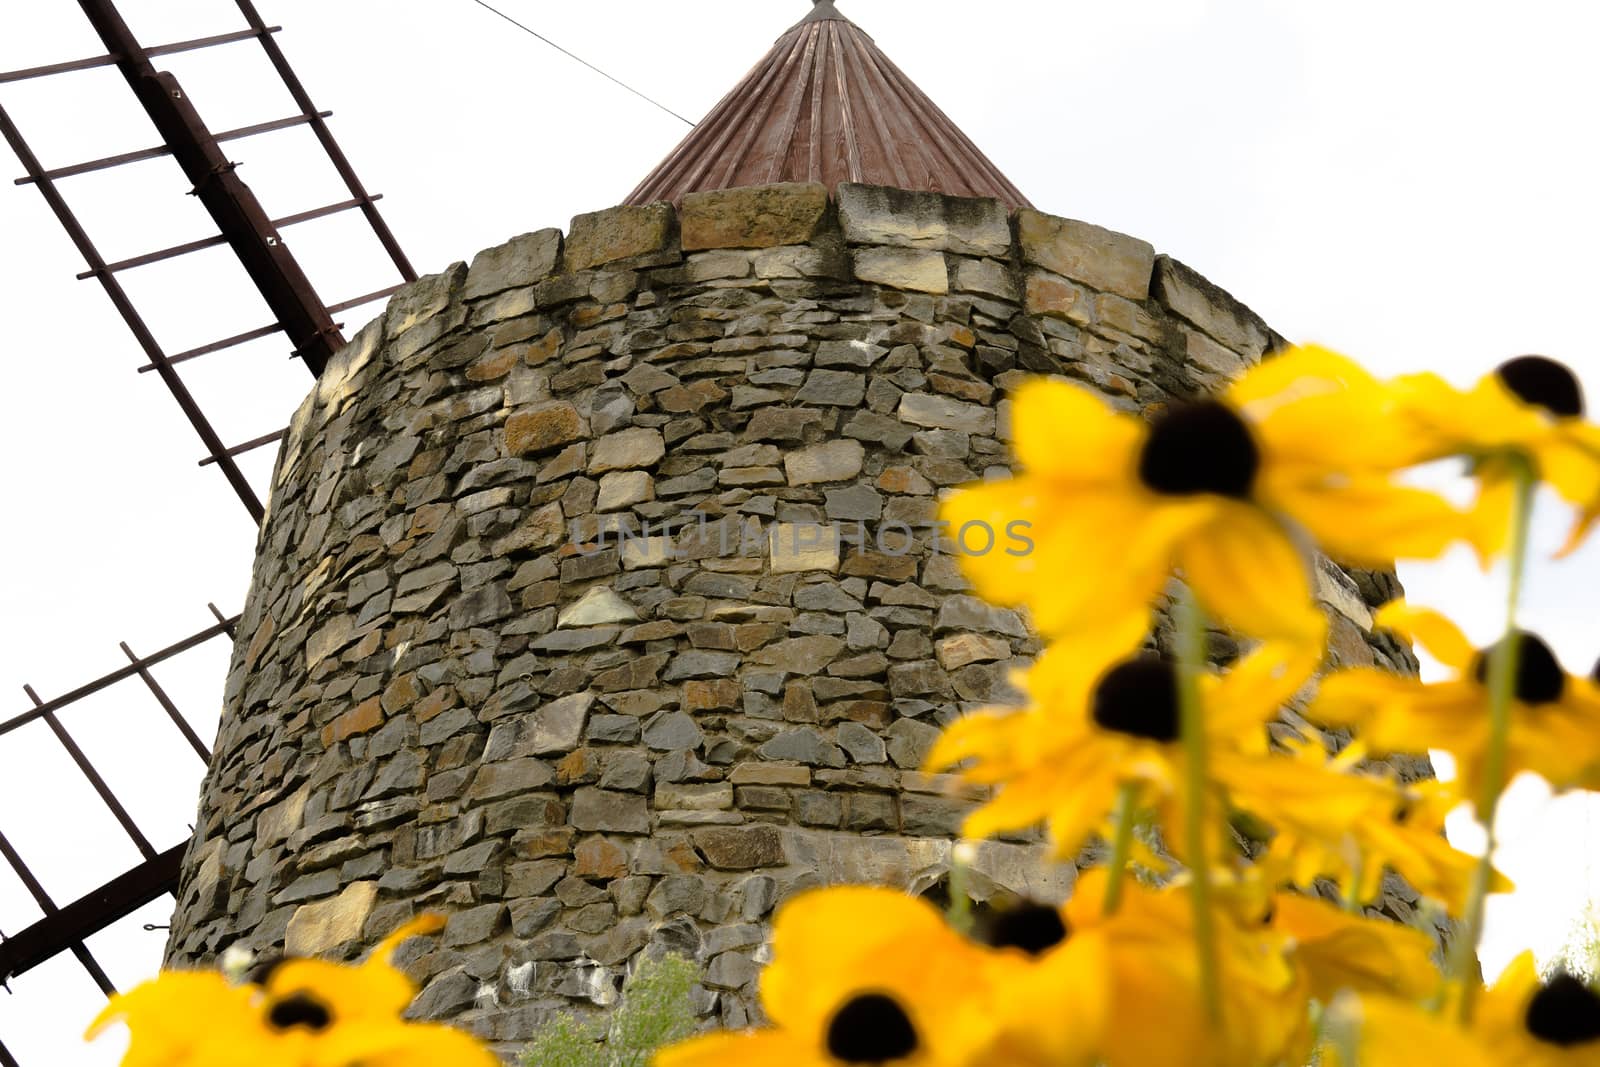 French mill with blurred yellow flowers in the foreground